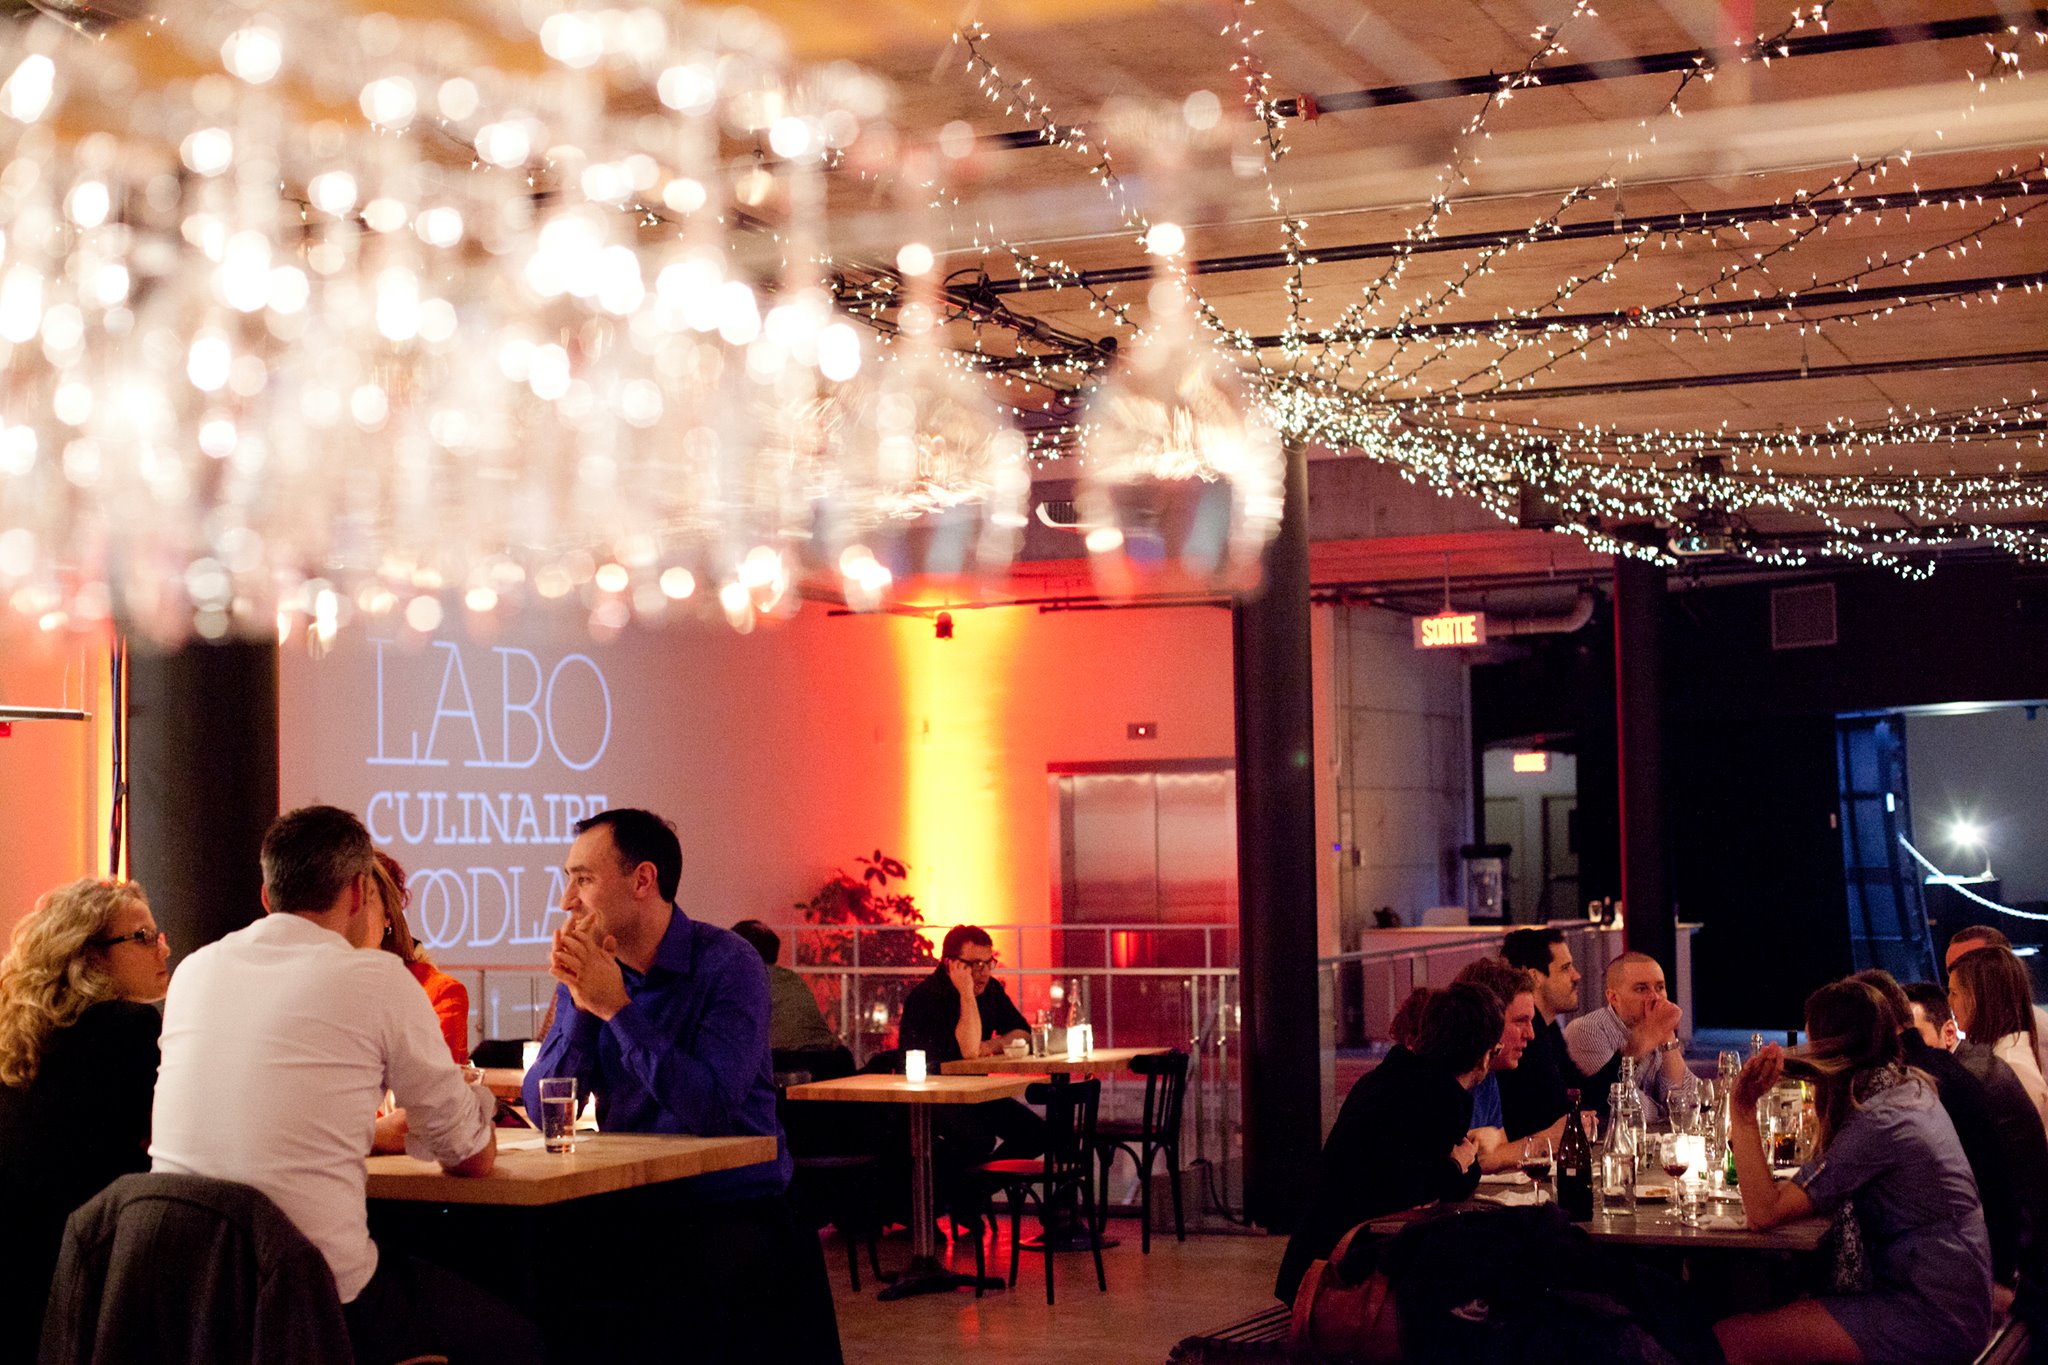 The Labo Culinaire braces for two New Yorkers